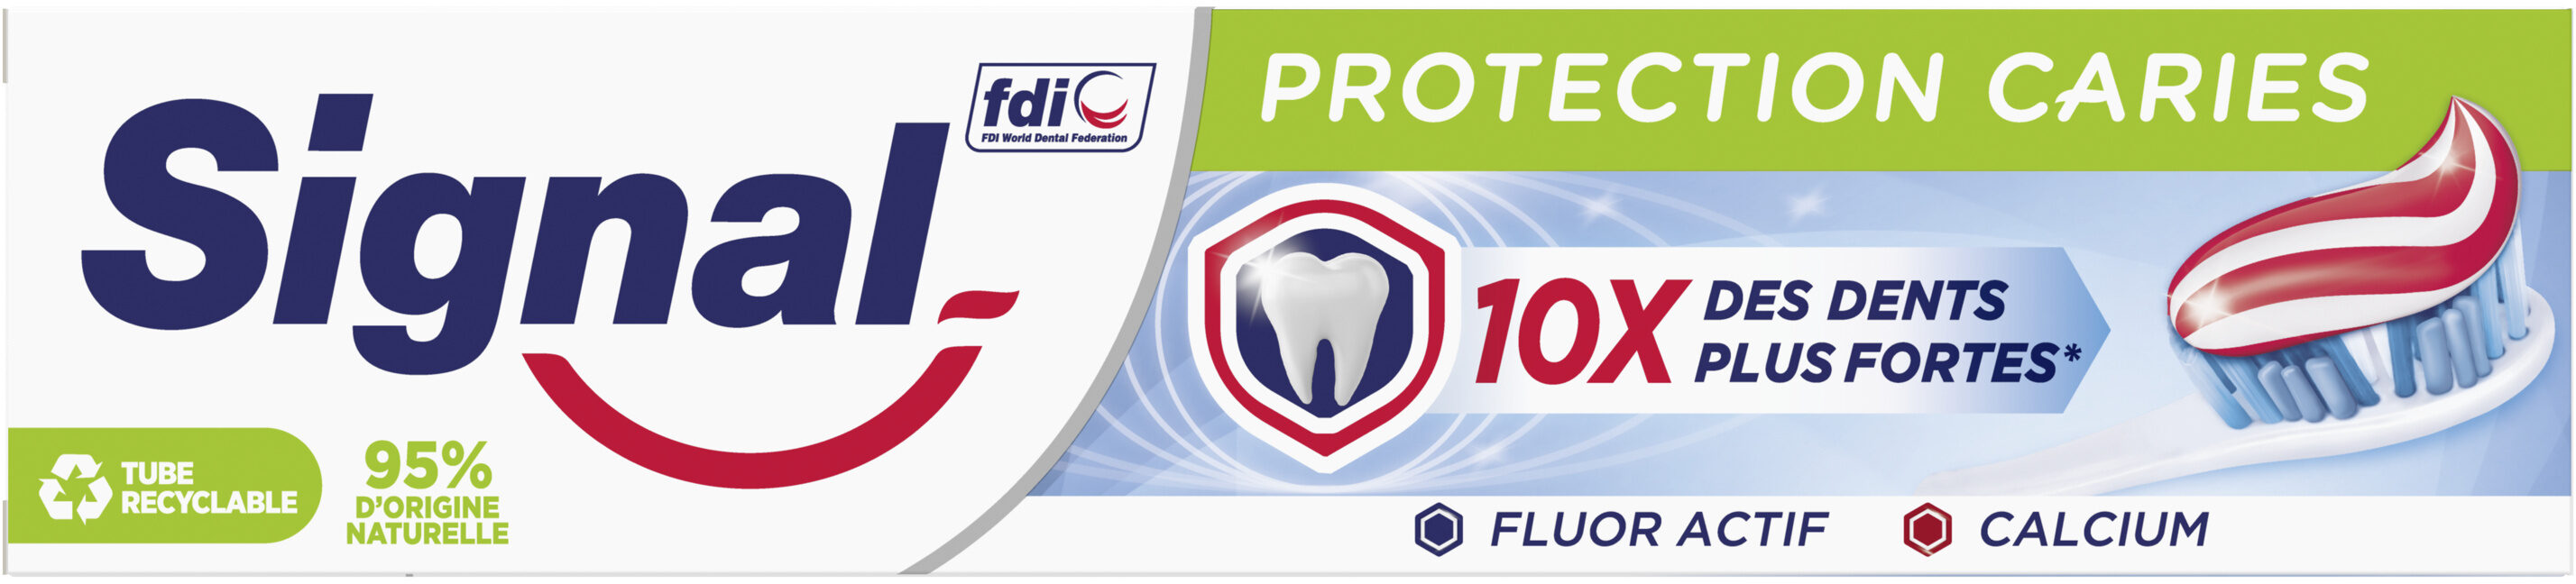 Signal Dentifrice Protection Caries 125ml - Product - fr